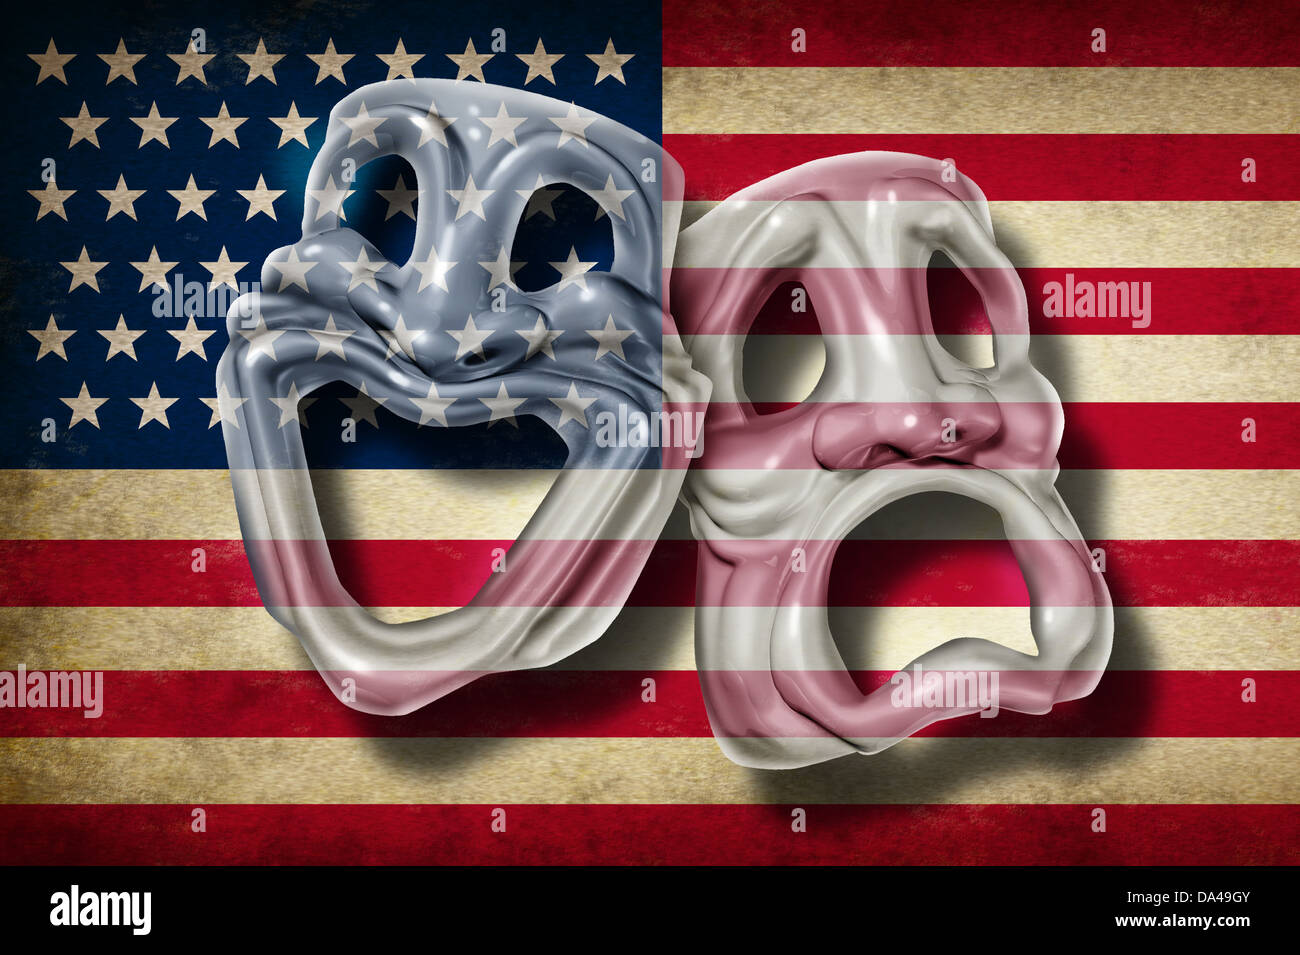 American theatre and Broadway performing arts concept with an old flag of the United States on a comedy and tragedy mask representing the rich cultural tradition of classical cinema and movie making in America. Stock Photo